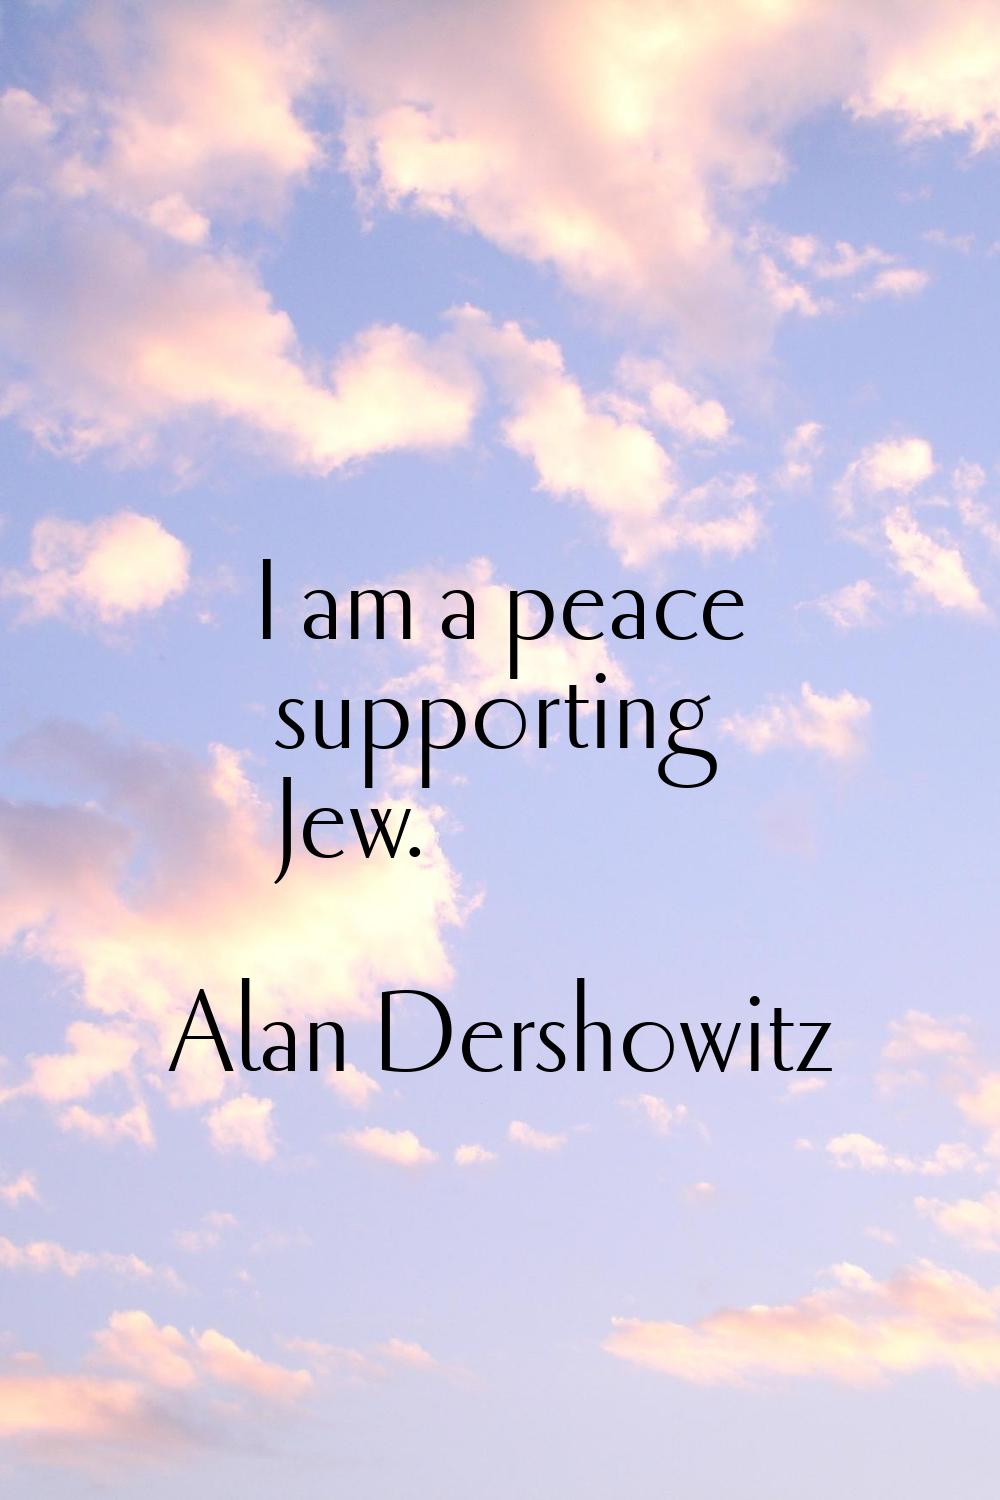 I am a peace supporting Jew.